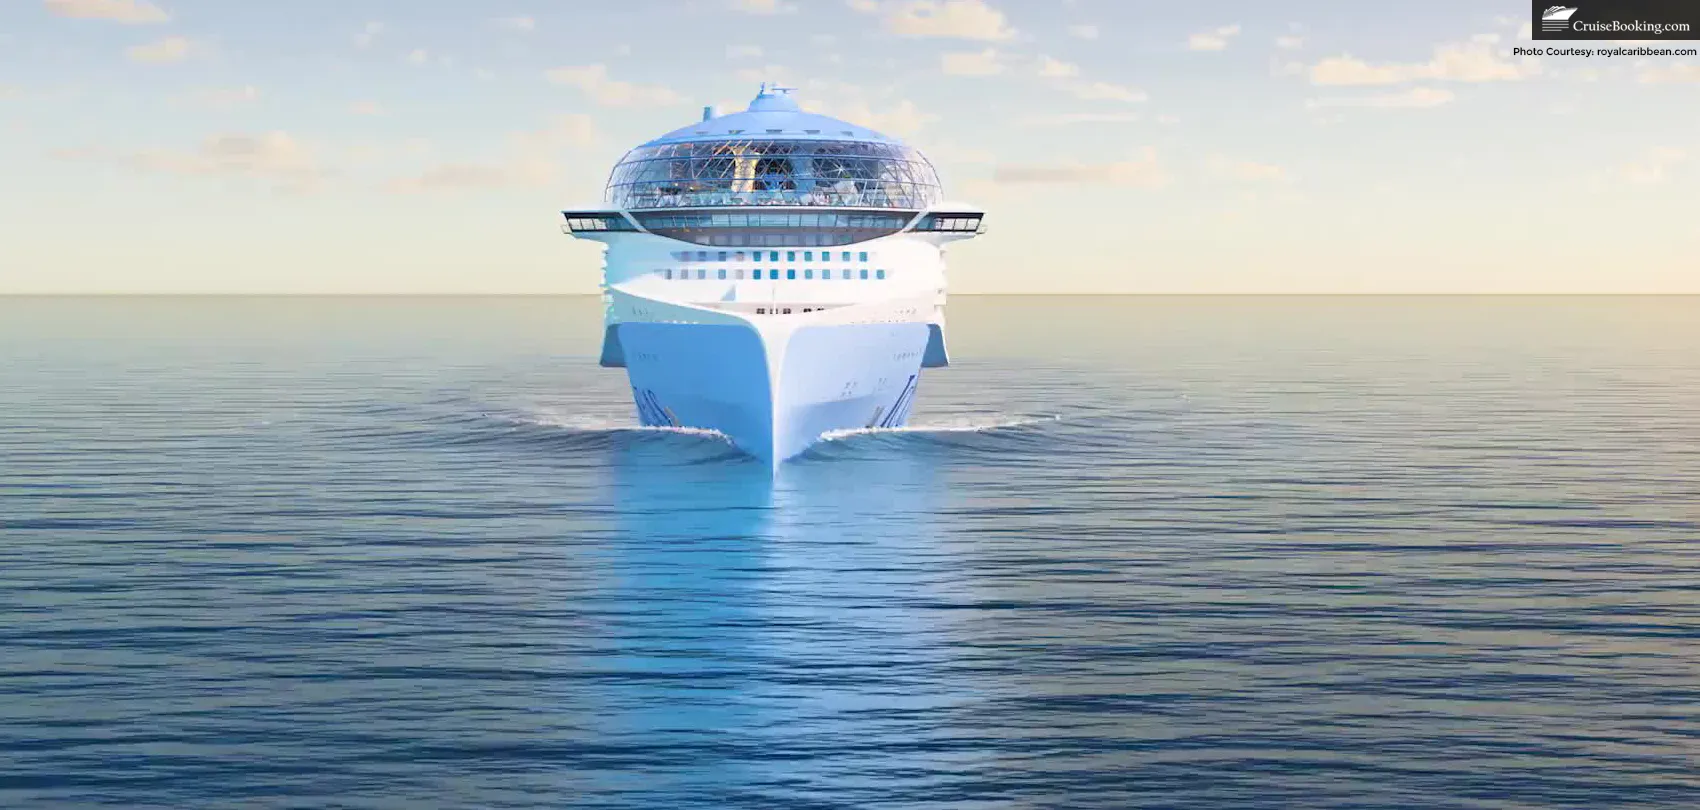 Royal Caribbean’s Icon of the Seas Set for Sea Trials From Meyer Turku